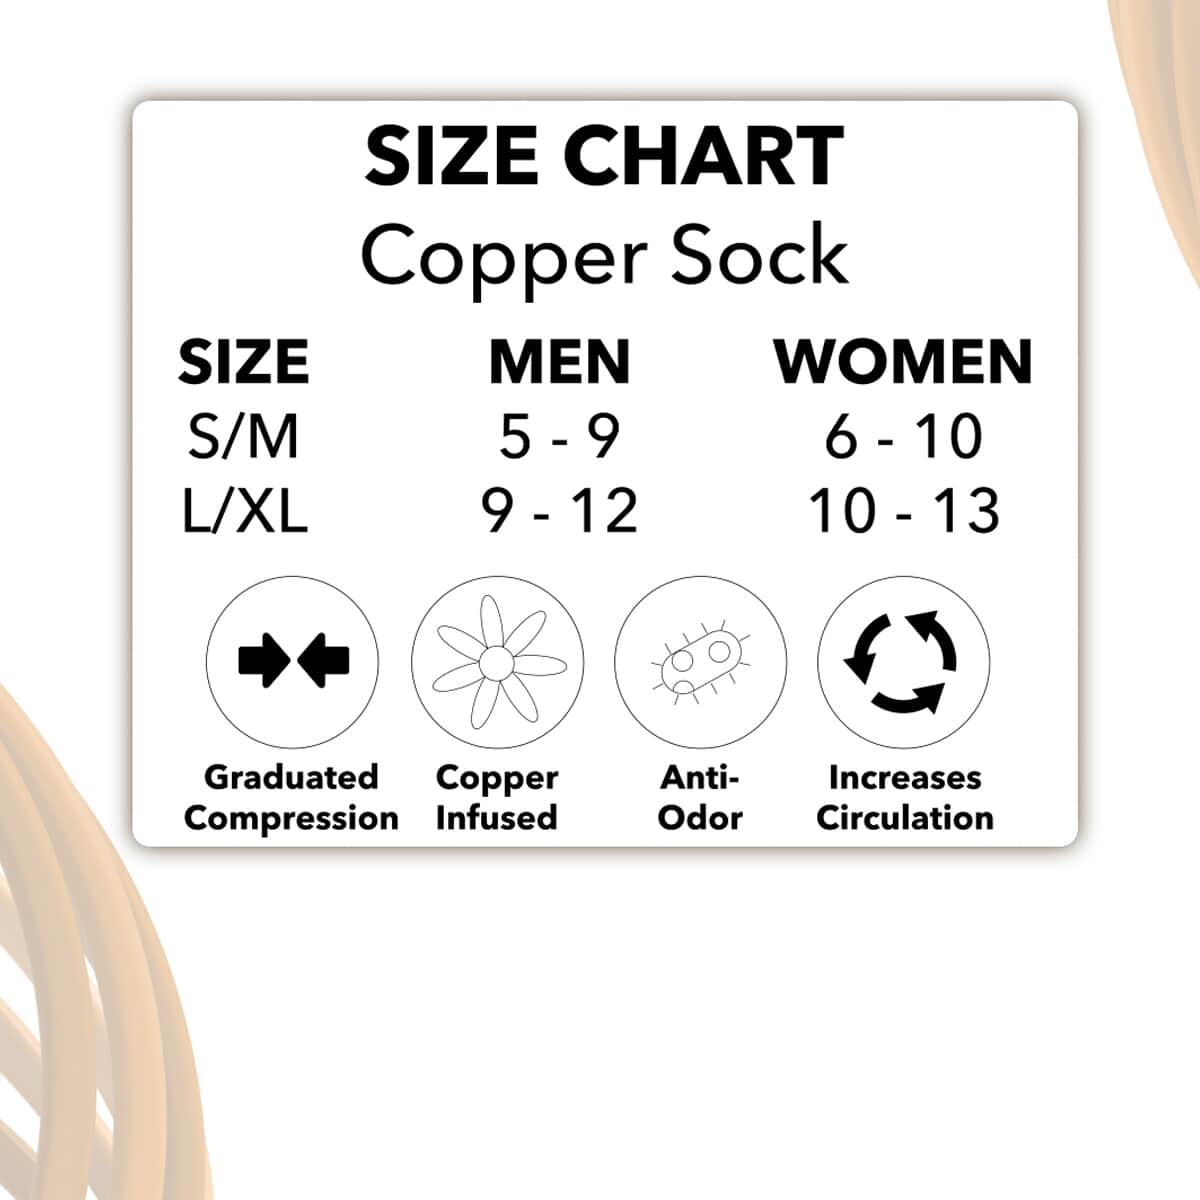 Set of 4 Pairs of Ankle Length Odor Free Copper Compression Socks For Men And Women, Premium Material Moisture Wicking Unisex Copper Infused Socks - White (L/XL) image number 6